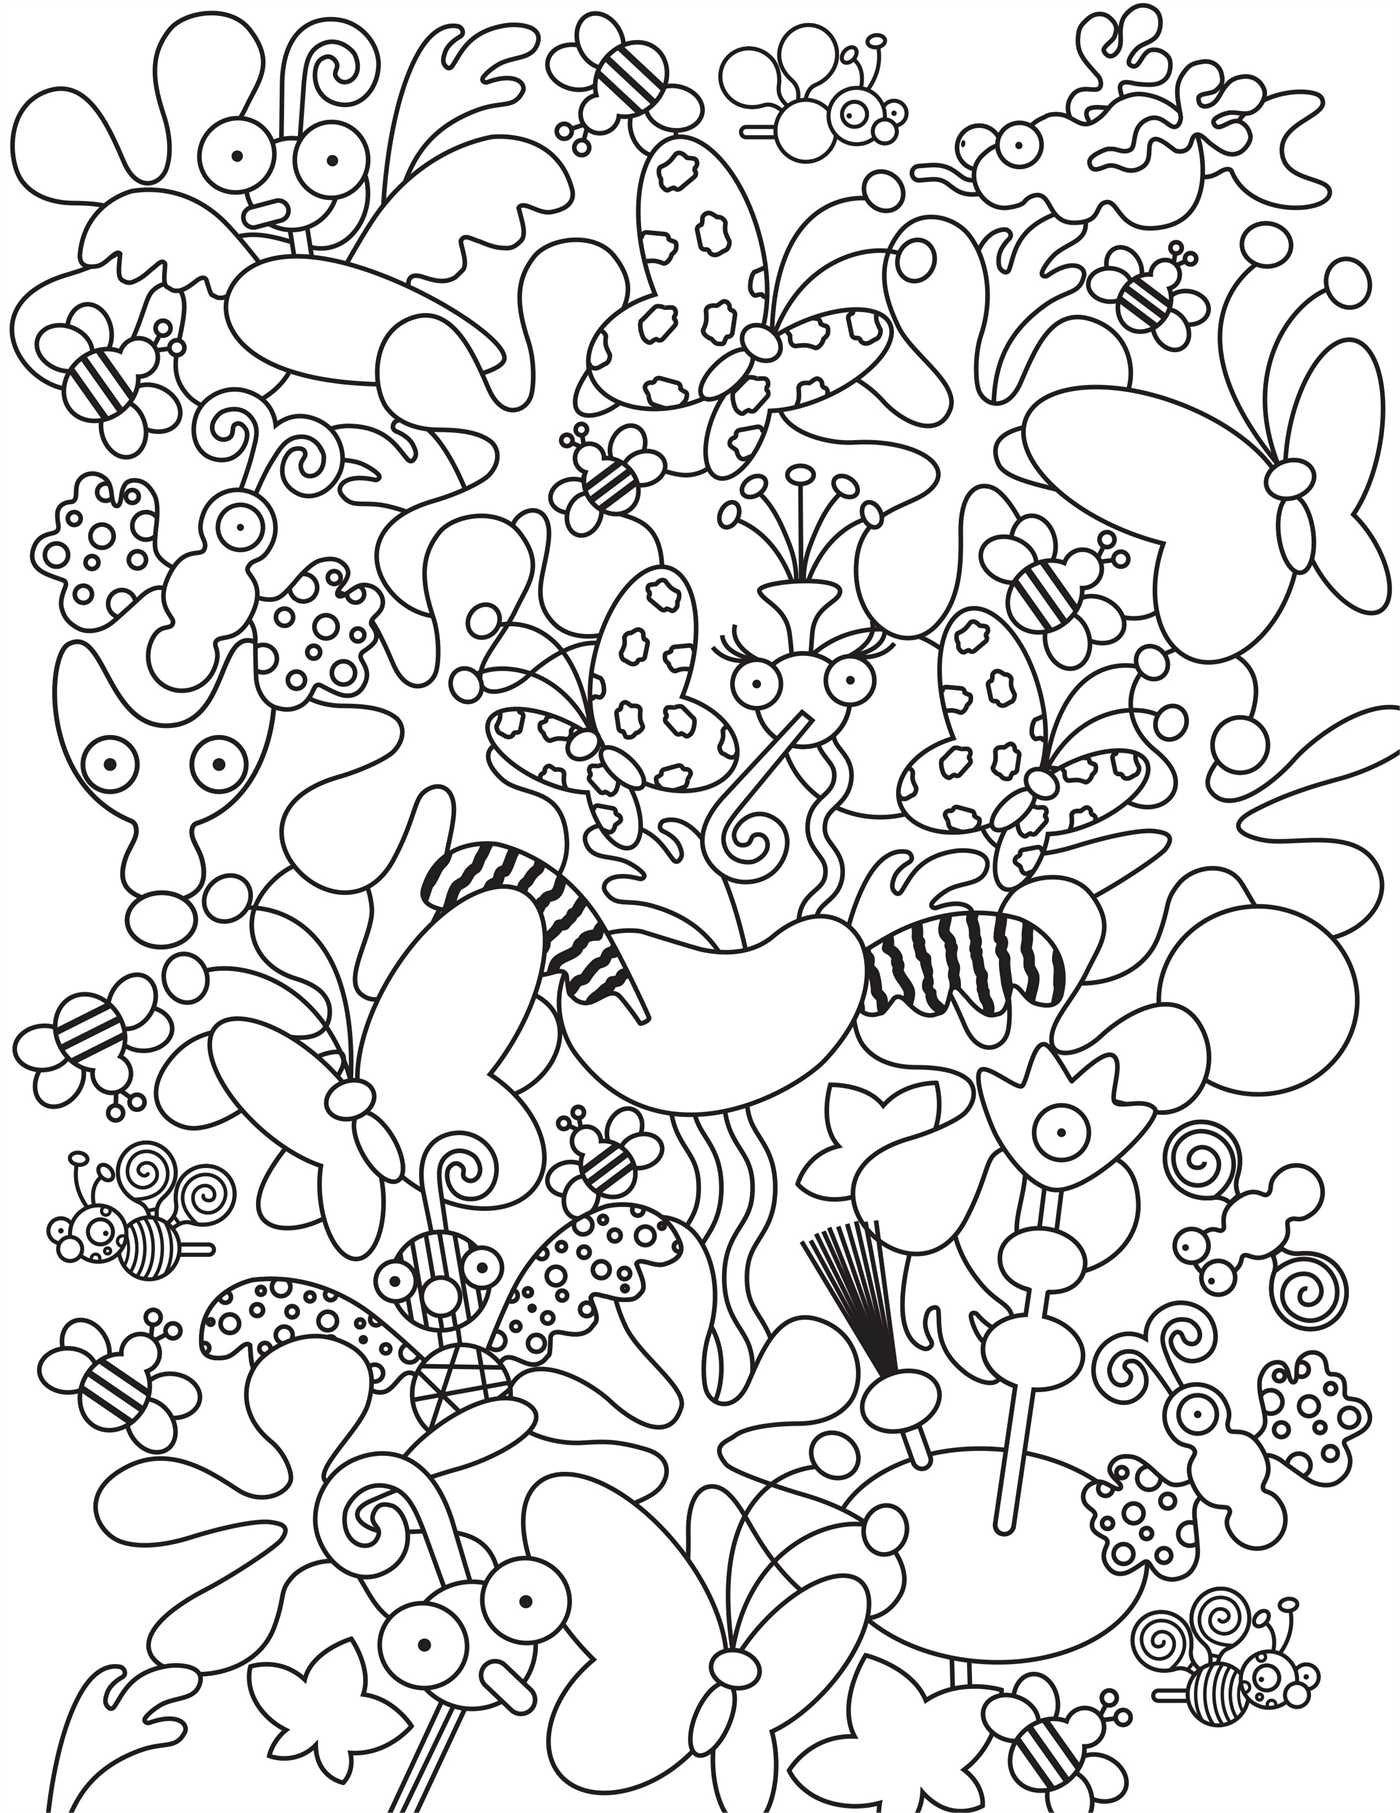 Free Doodle Art Coloring Pages